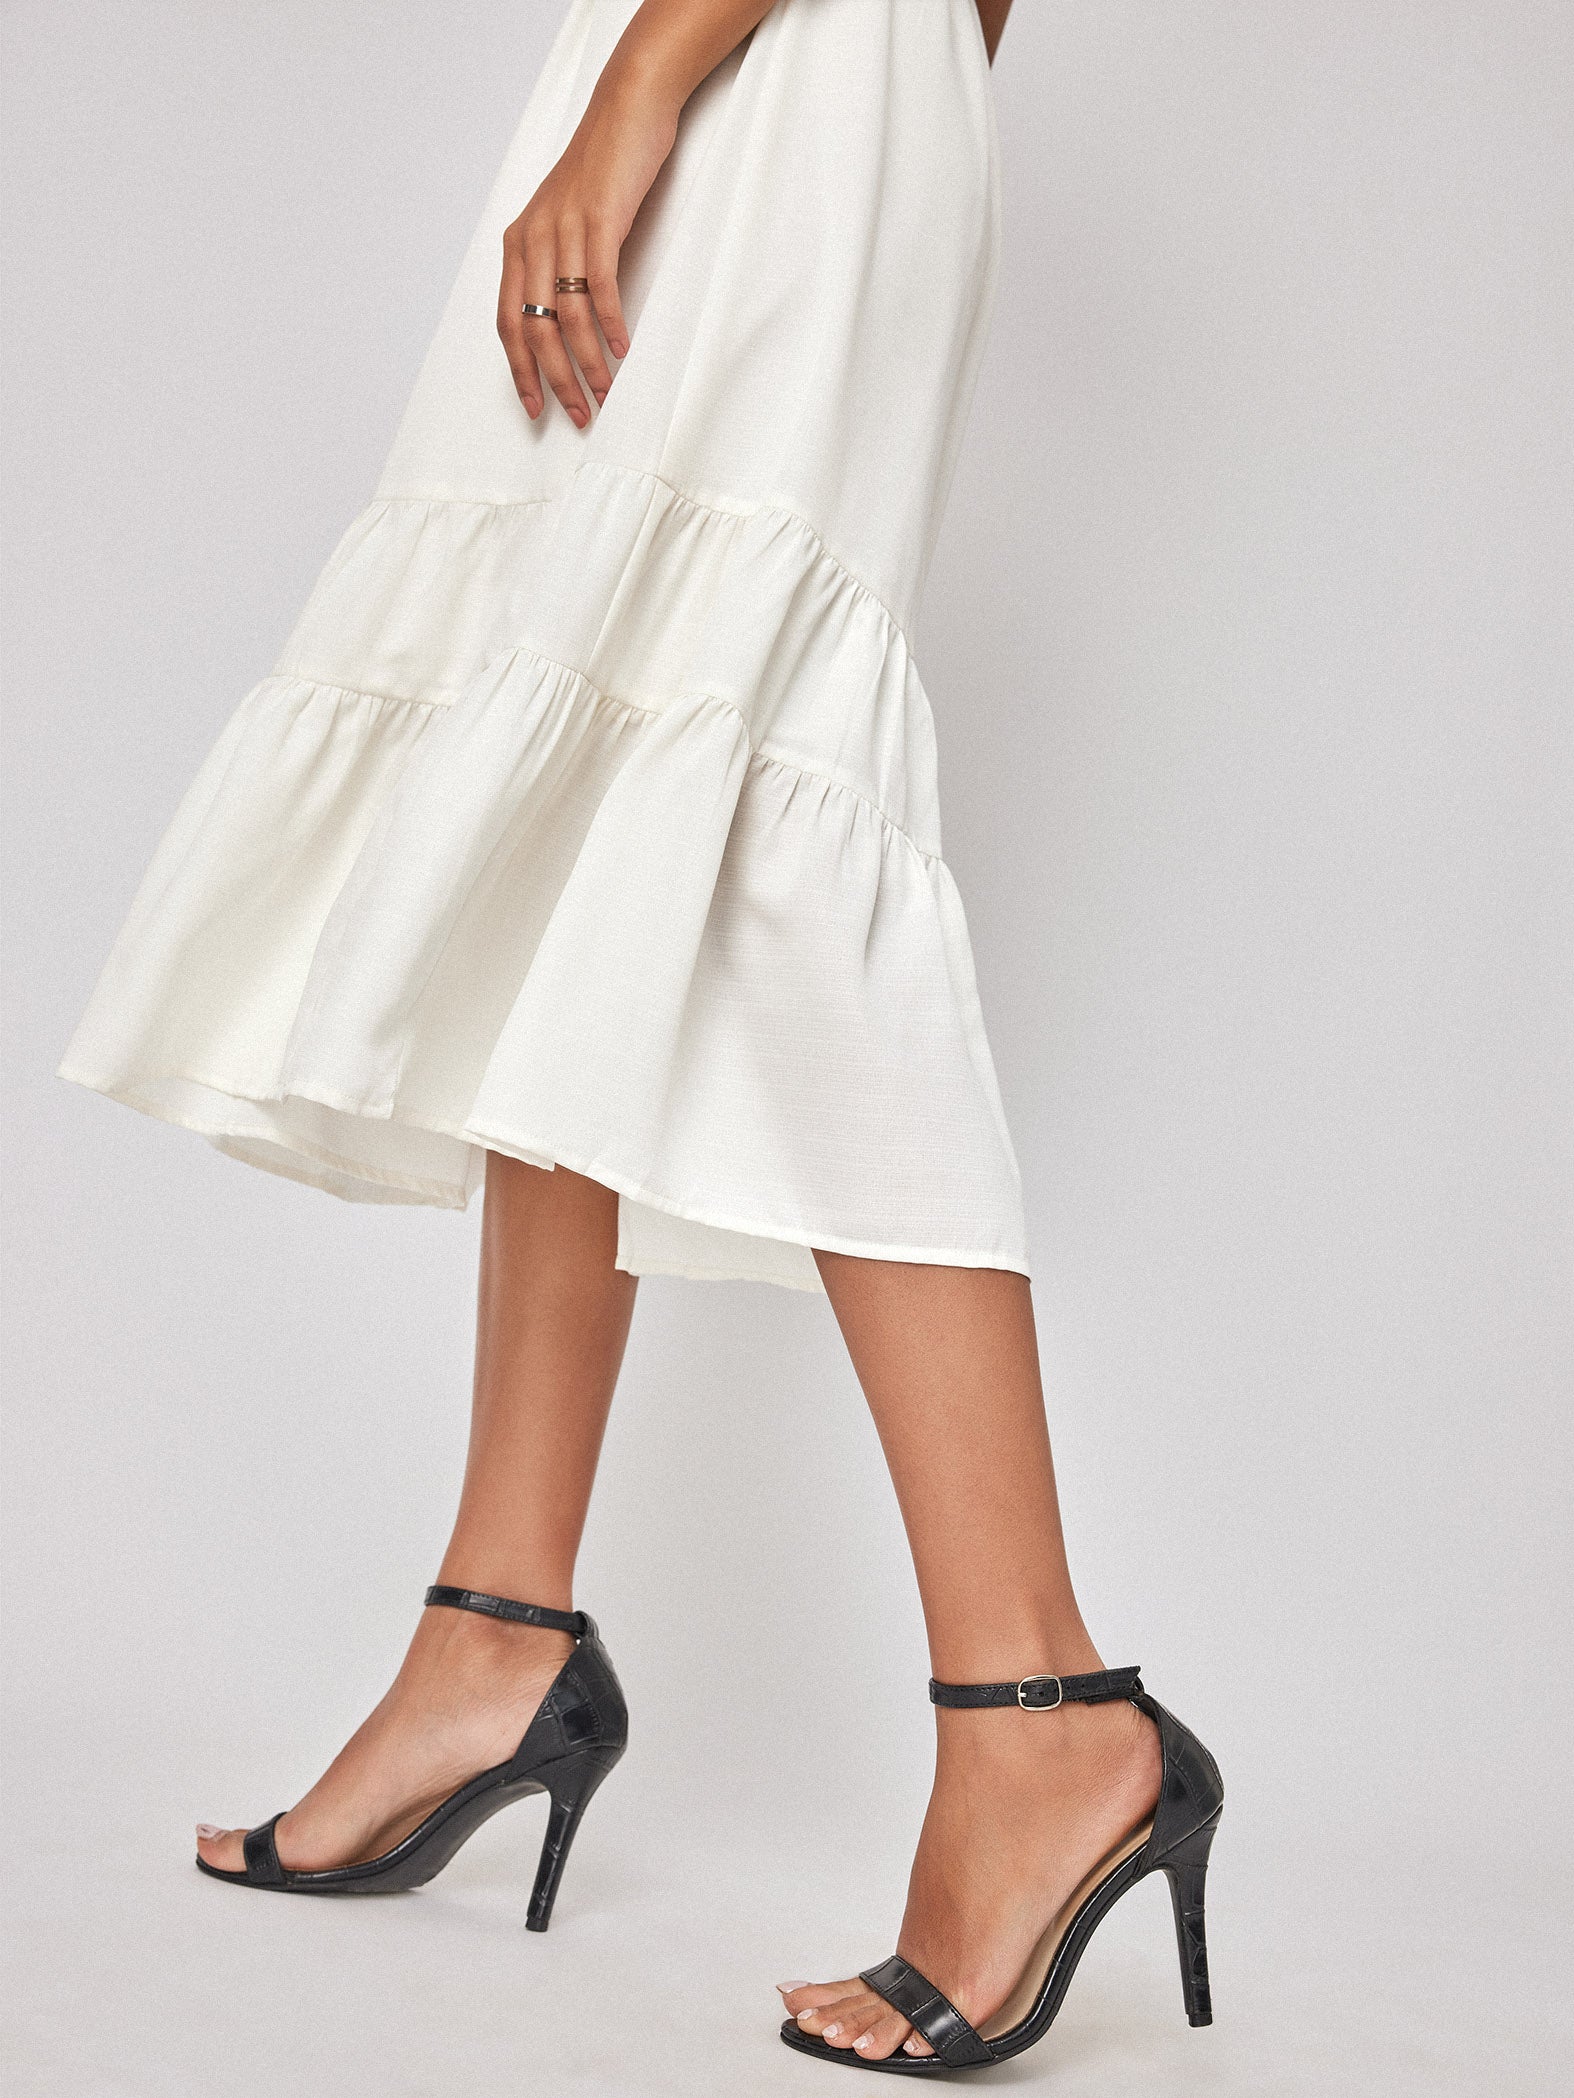 White Contrast Piping Tiered Dress